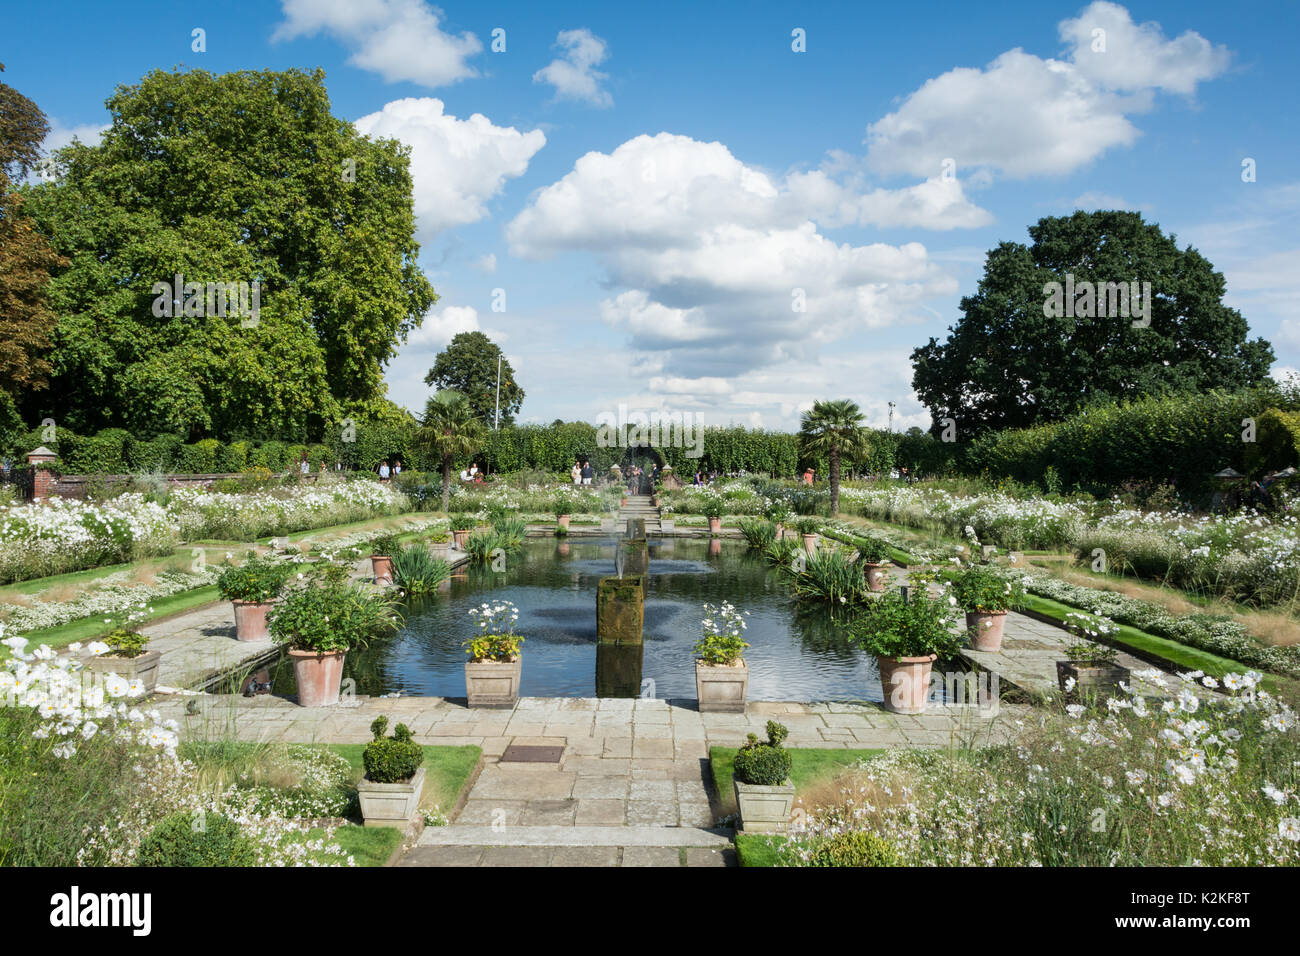 Well-wishers visit the White Garden at Kensington Palace to commemorate and pay tribute to Princess Diana, twenty years after her death. Stock Photo